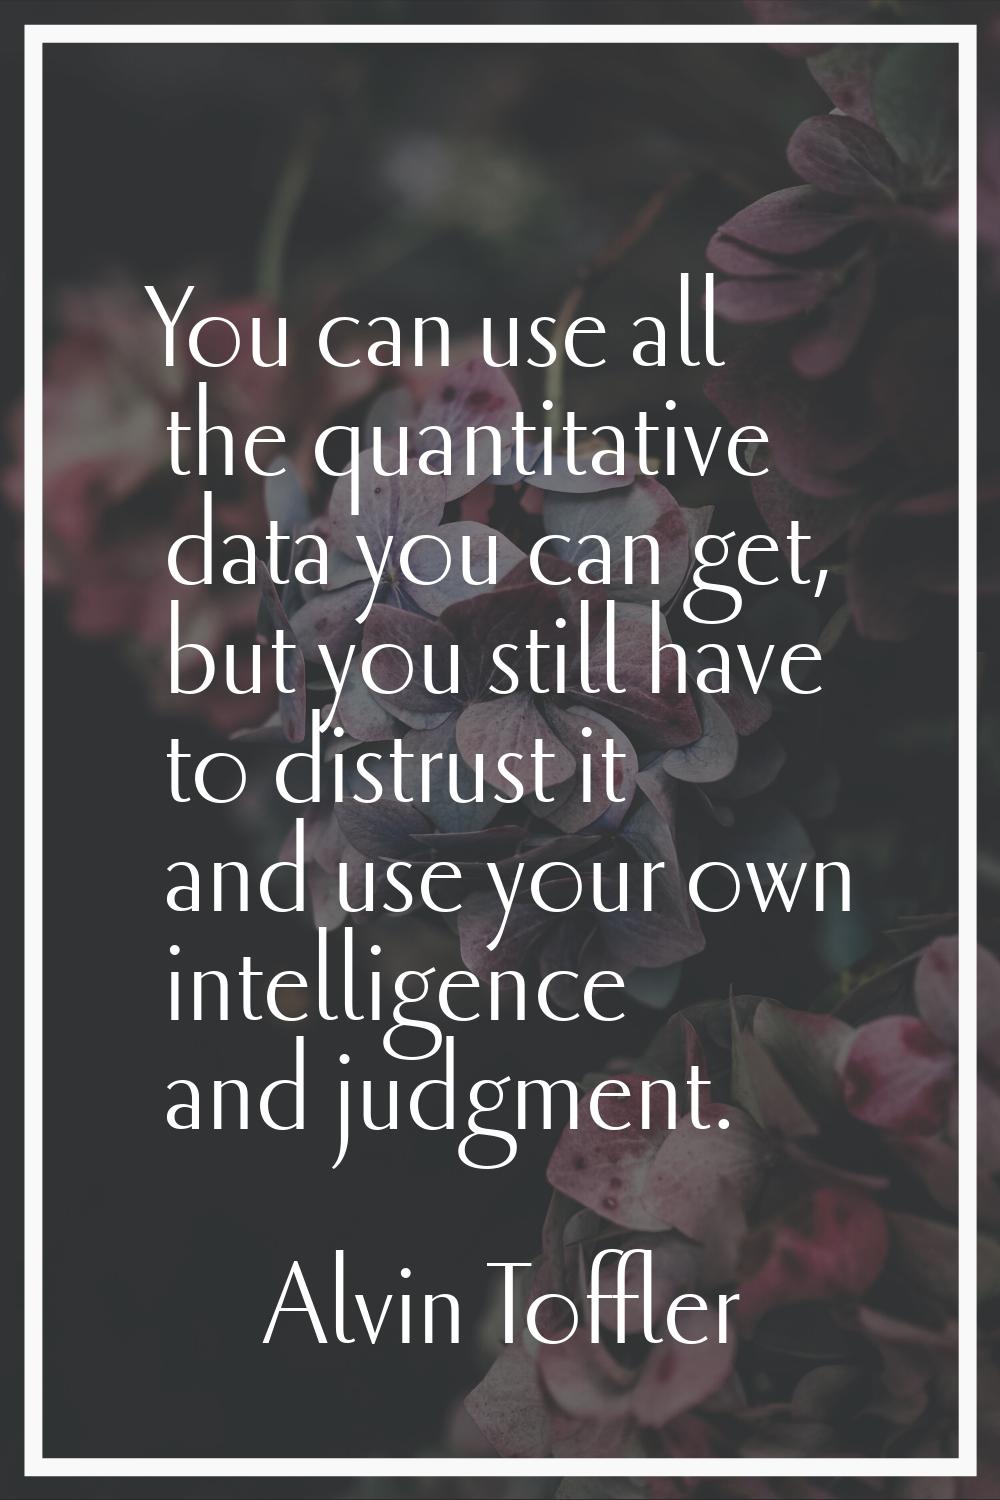 You can use all the quantitative data you can get, but you still have to distrust it and use your o